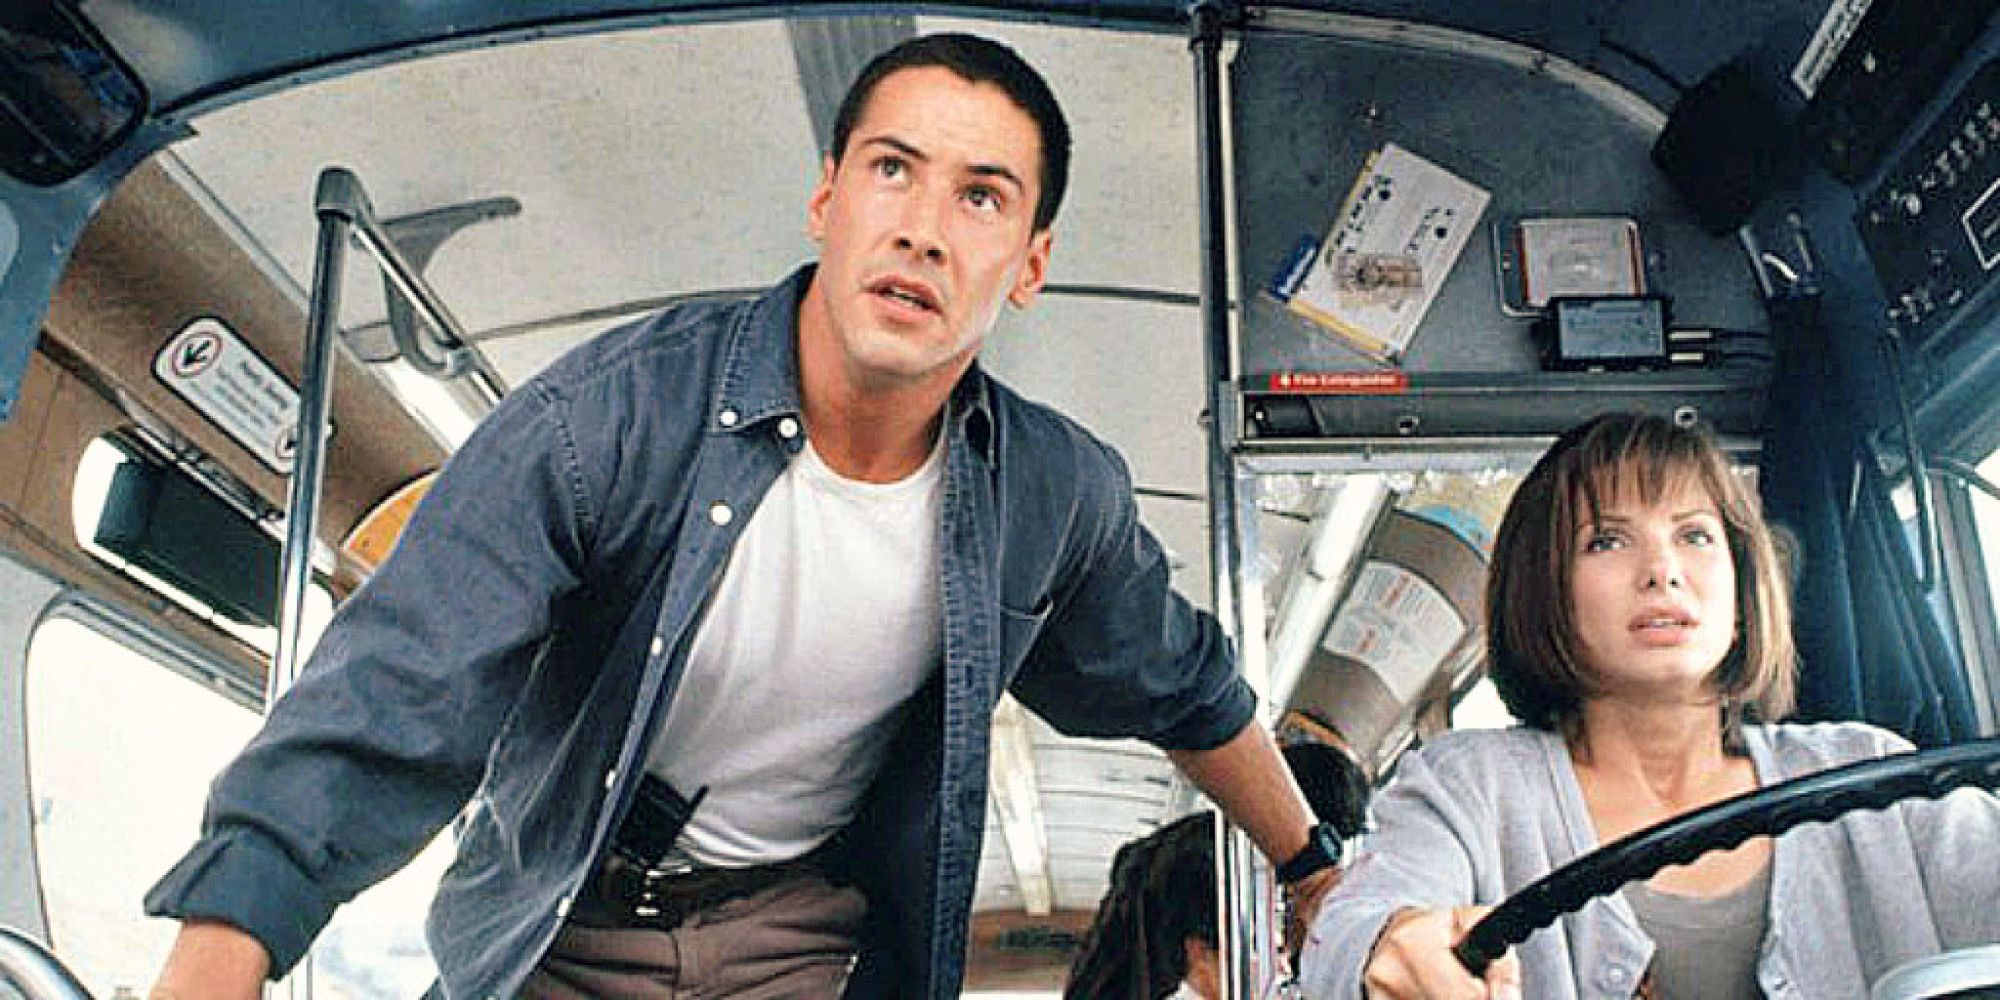 Sandra Bullock drives the bus and Keanu Reeves guides her in the movie Speed.